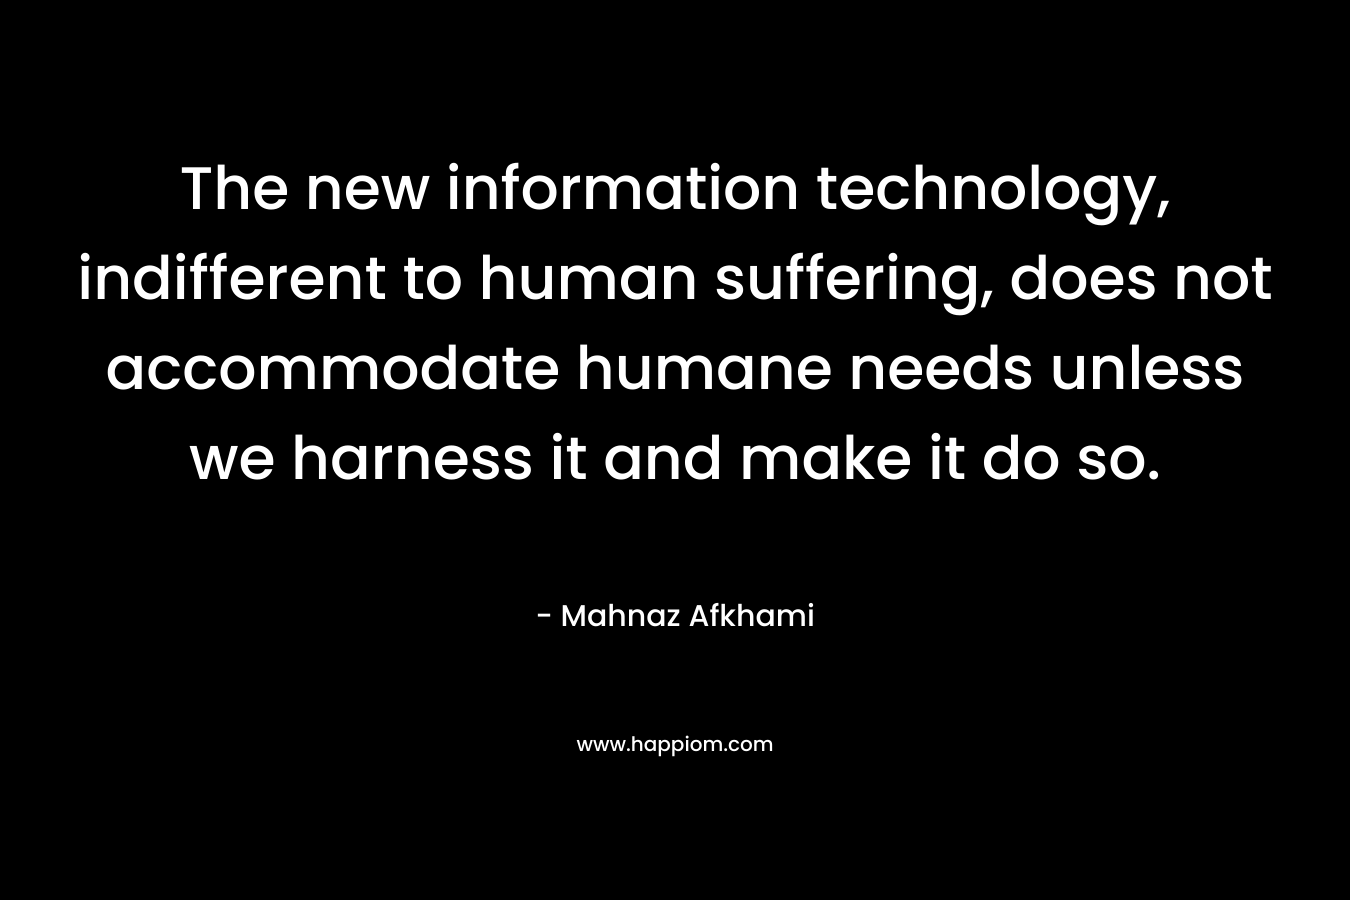 The new information technology, indifferent to human suffering, does not accommodate humane needs unless we harness it and make it do so.